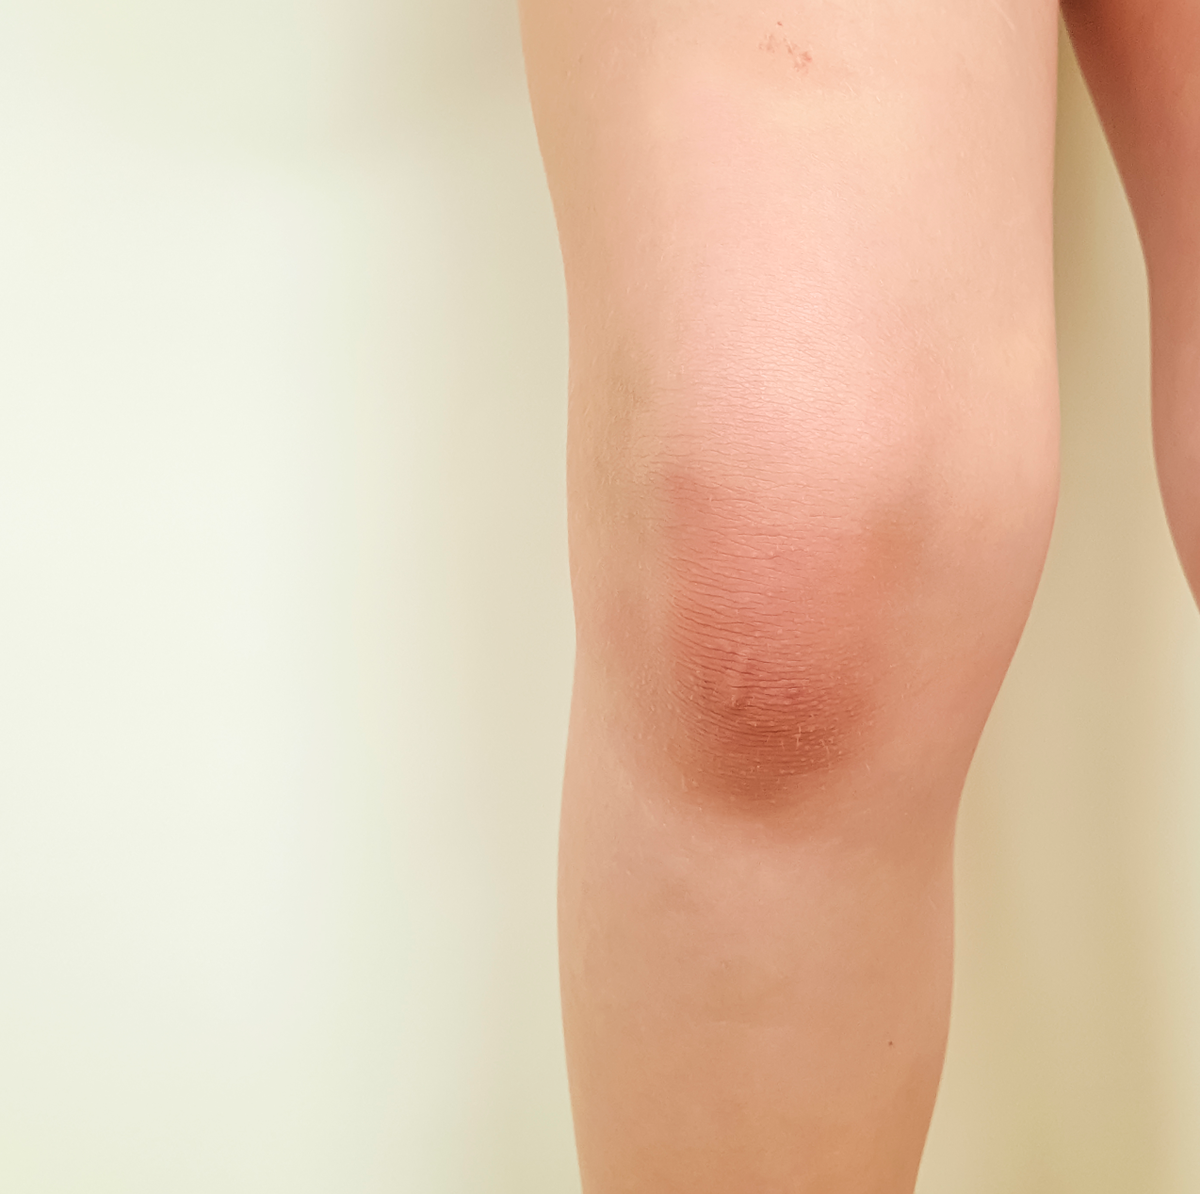 Knee Pain on Outside of Joint: Four Reasons Why